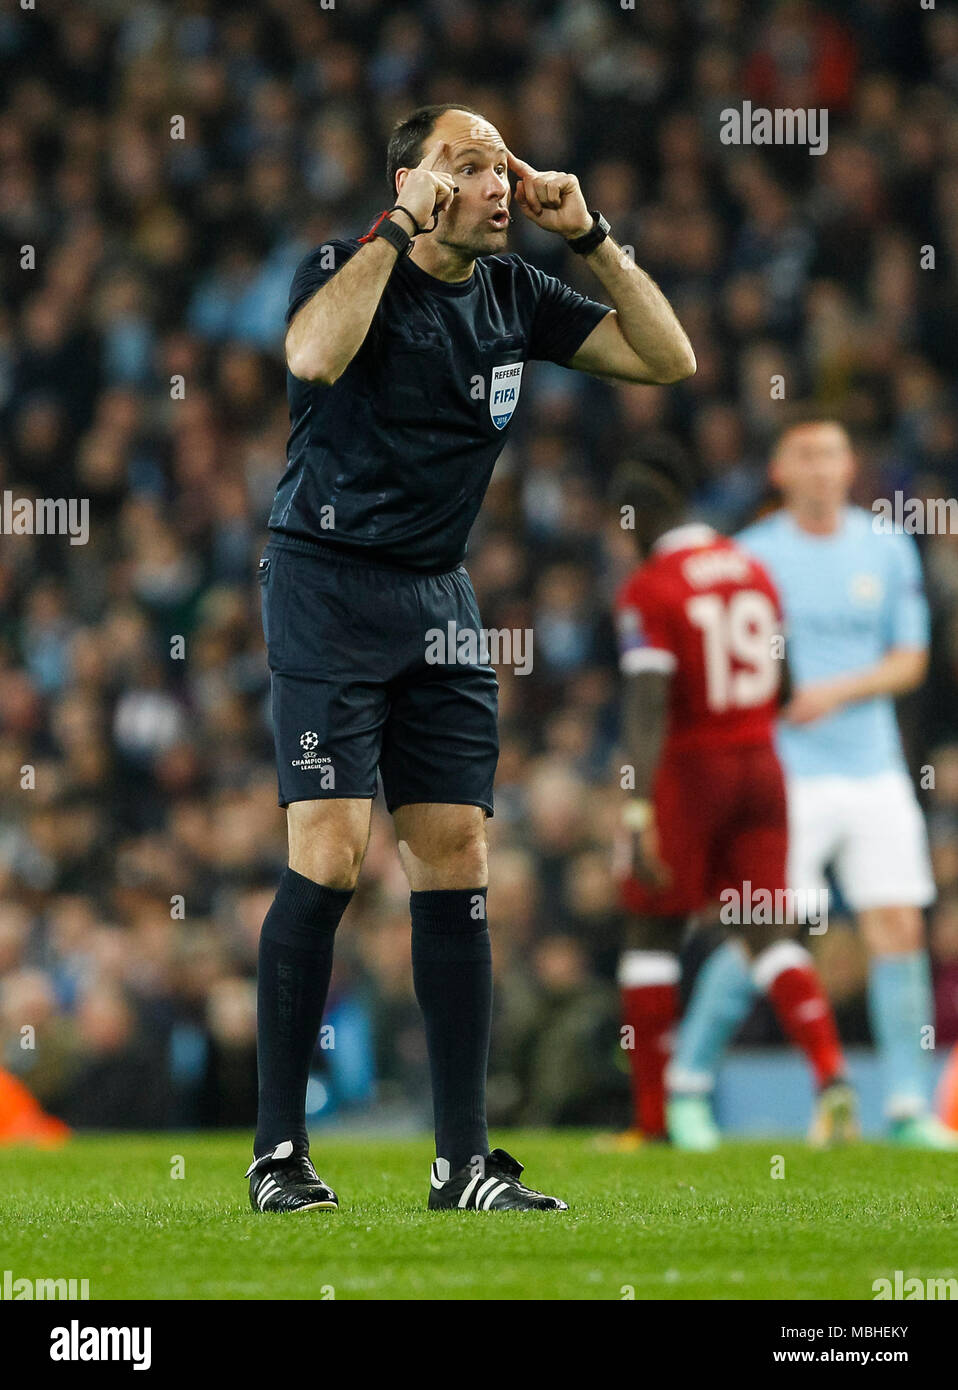 Referee Antonio Mateu Lahoz gestures during the UEFA Champions League Quarter Final second leg match between Manchester City and Liverpool at the Etihad Stadium on April 10th 2018 in Manchester, England. (Photo by Daniel Chesterton/phcimages.com) Stock Photo